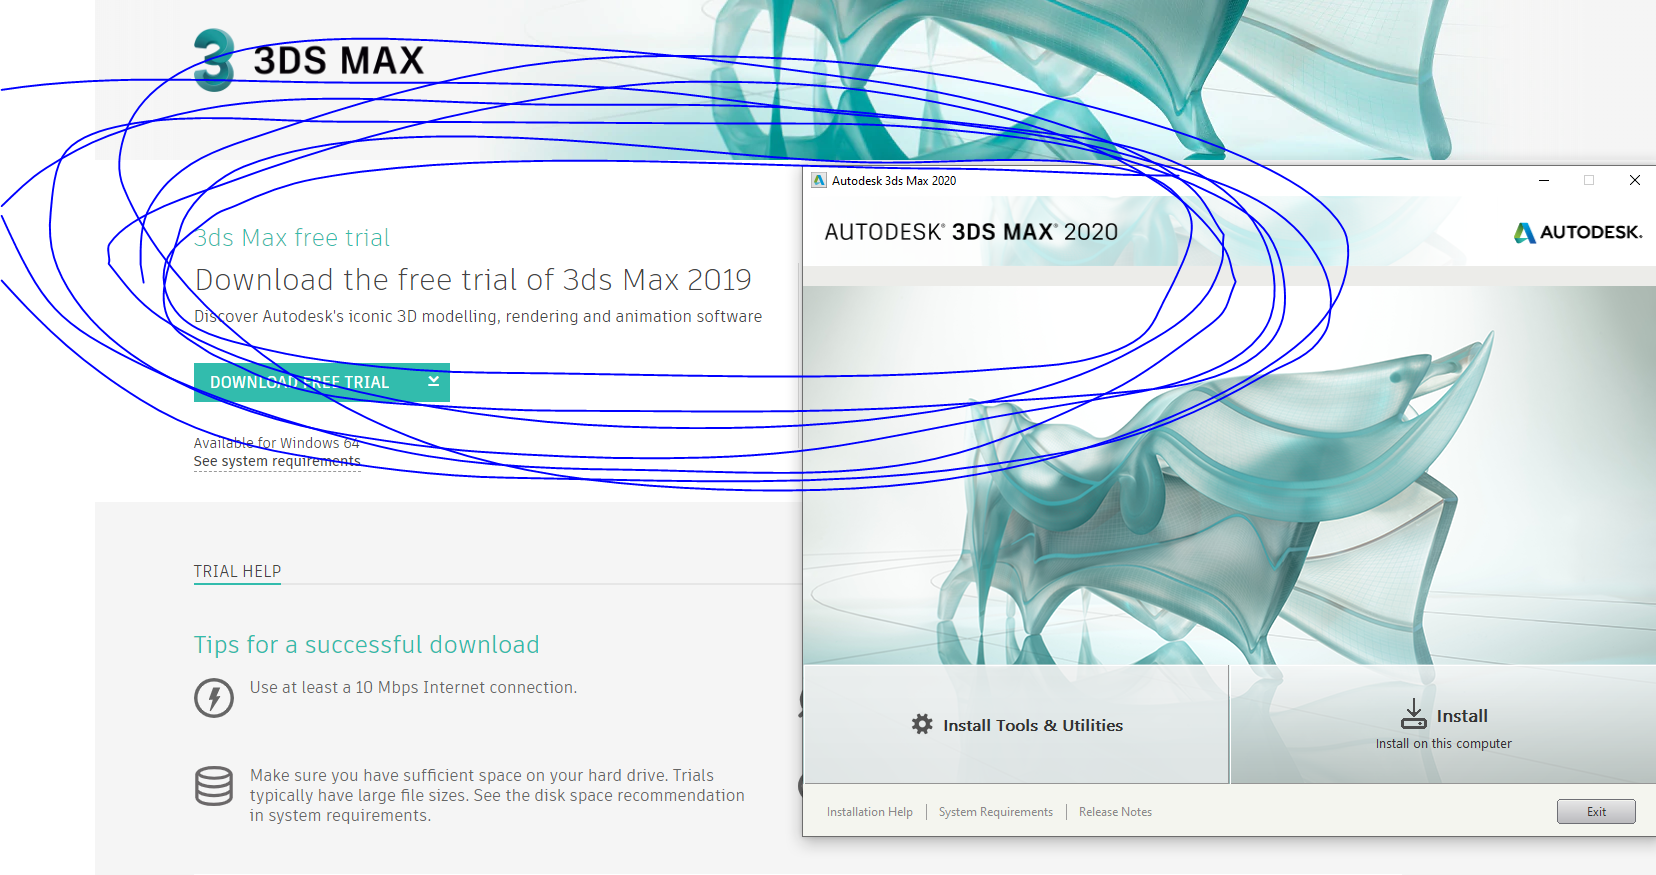 Downloading Max trial 2019 downloads 2020 instead - Autodesk Community - 3ds  Max